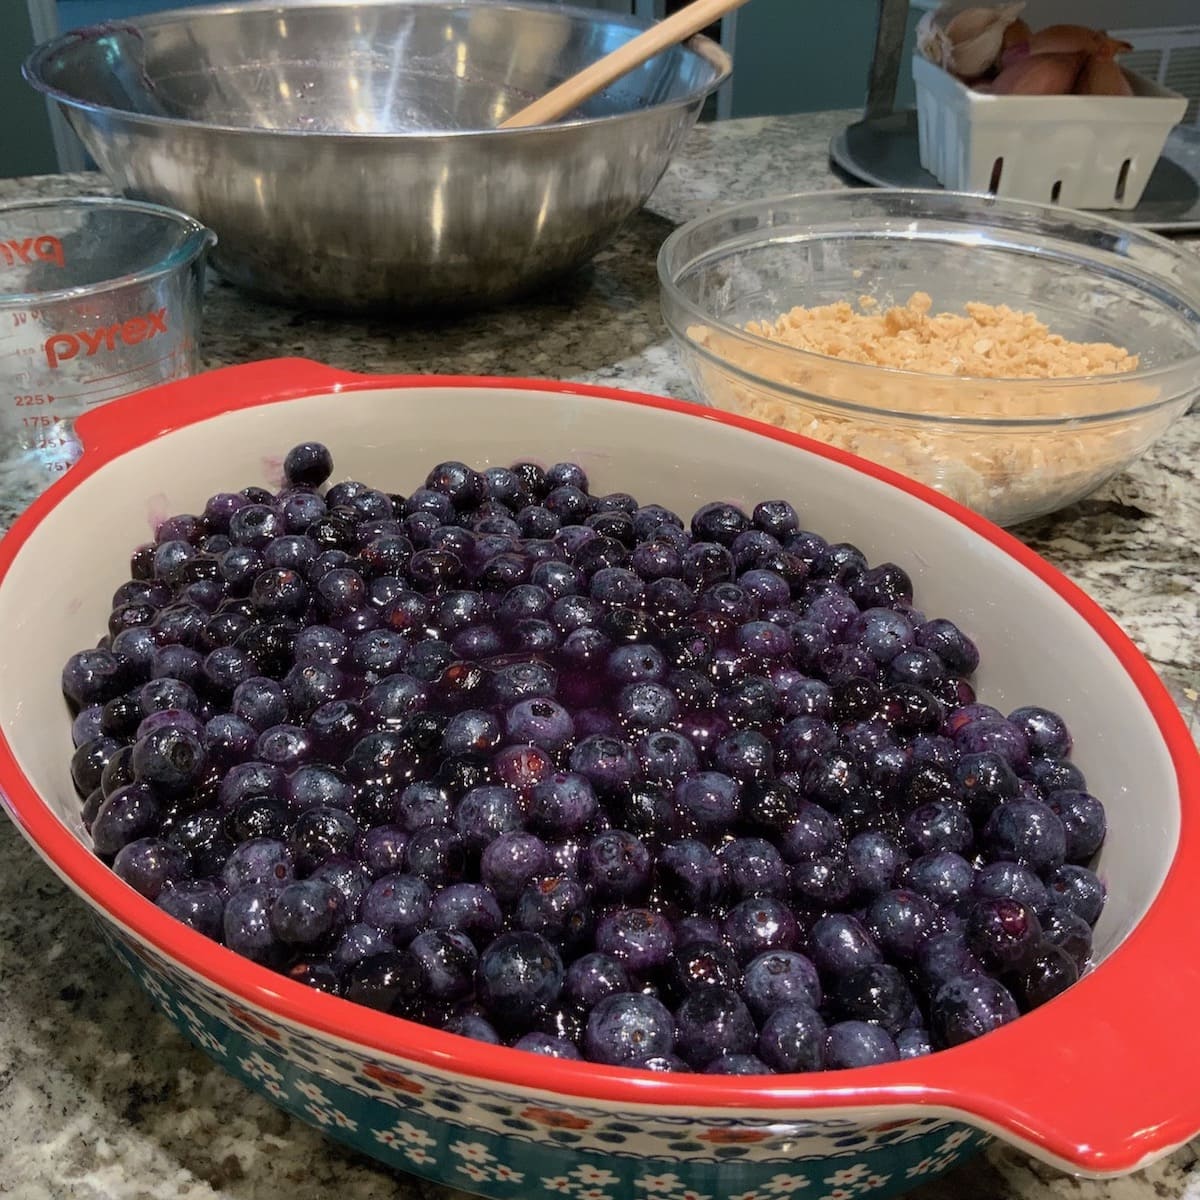 blueberries in pan showing appropriate pan size for baking